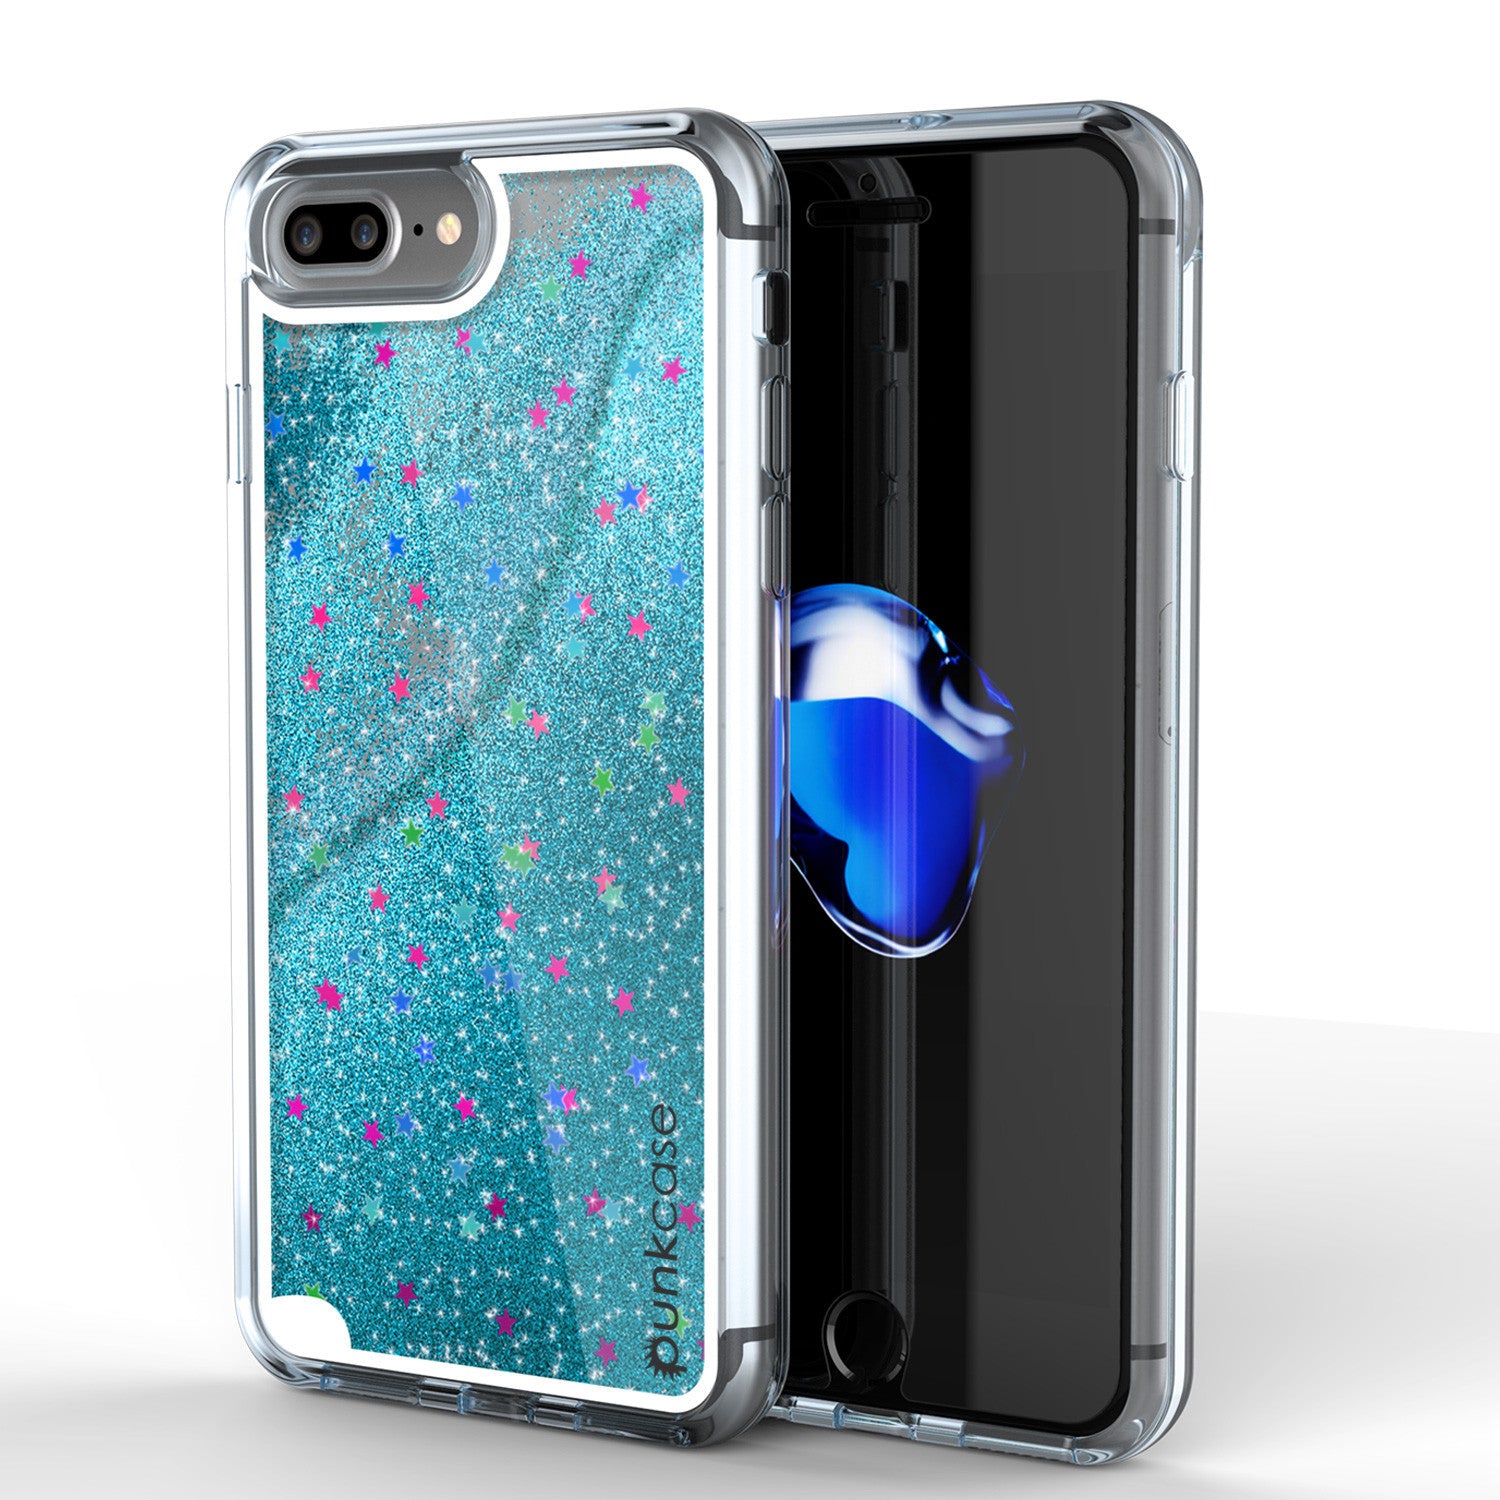 iPhone 7 Plus Case, PunkCase LIQUID Teal Series, Protective Dual Layer Floating Glitter Cover (Color in image: teal)